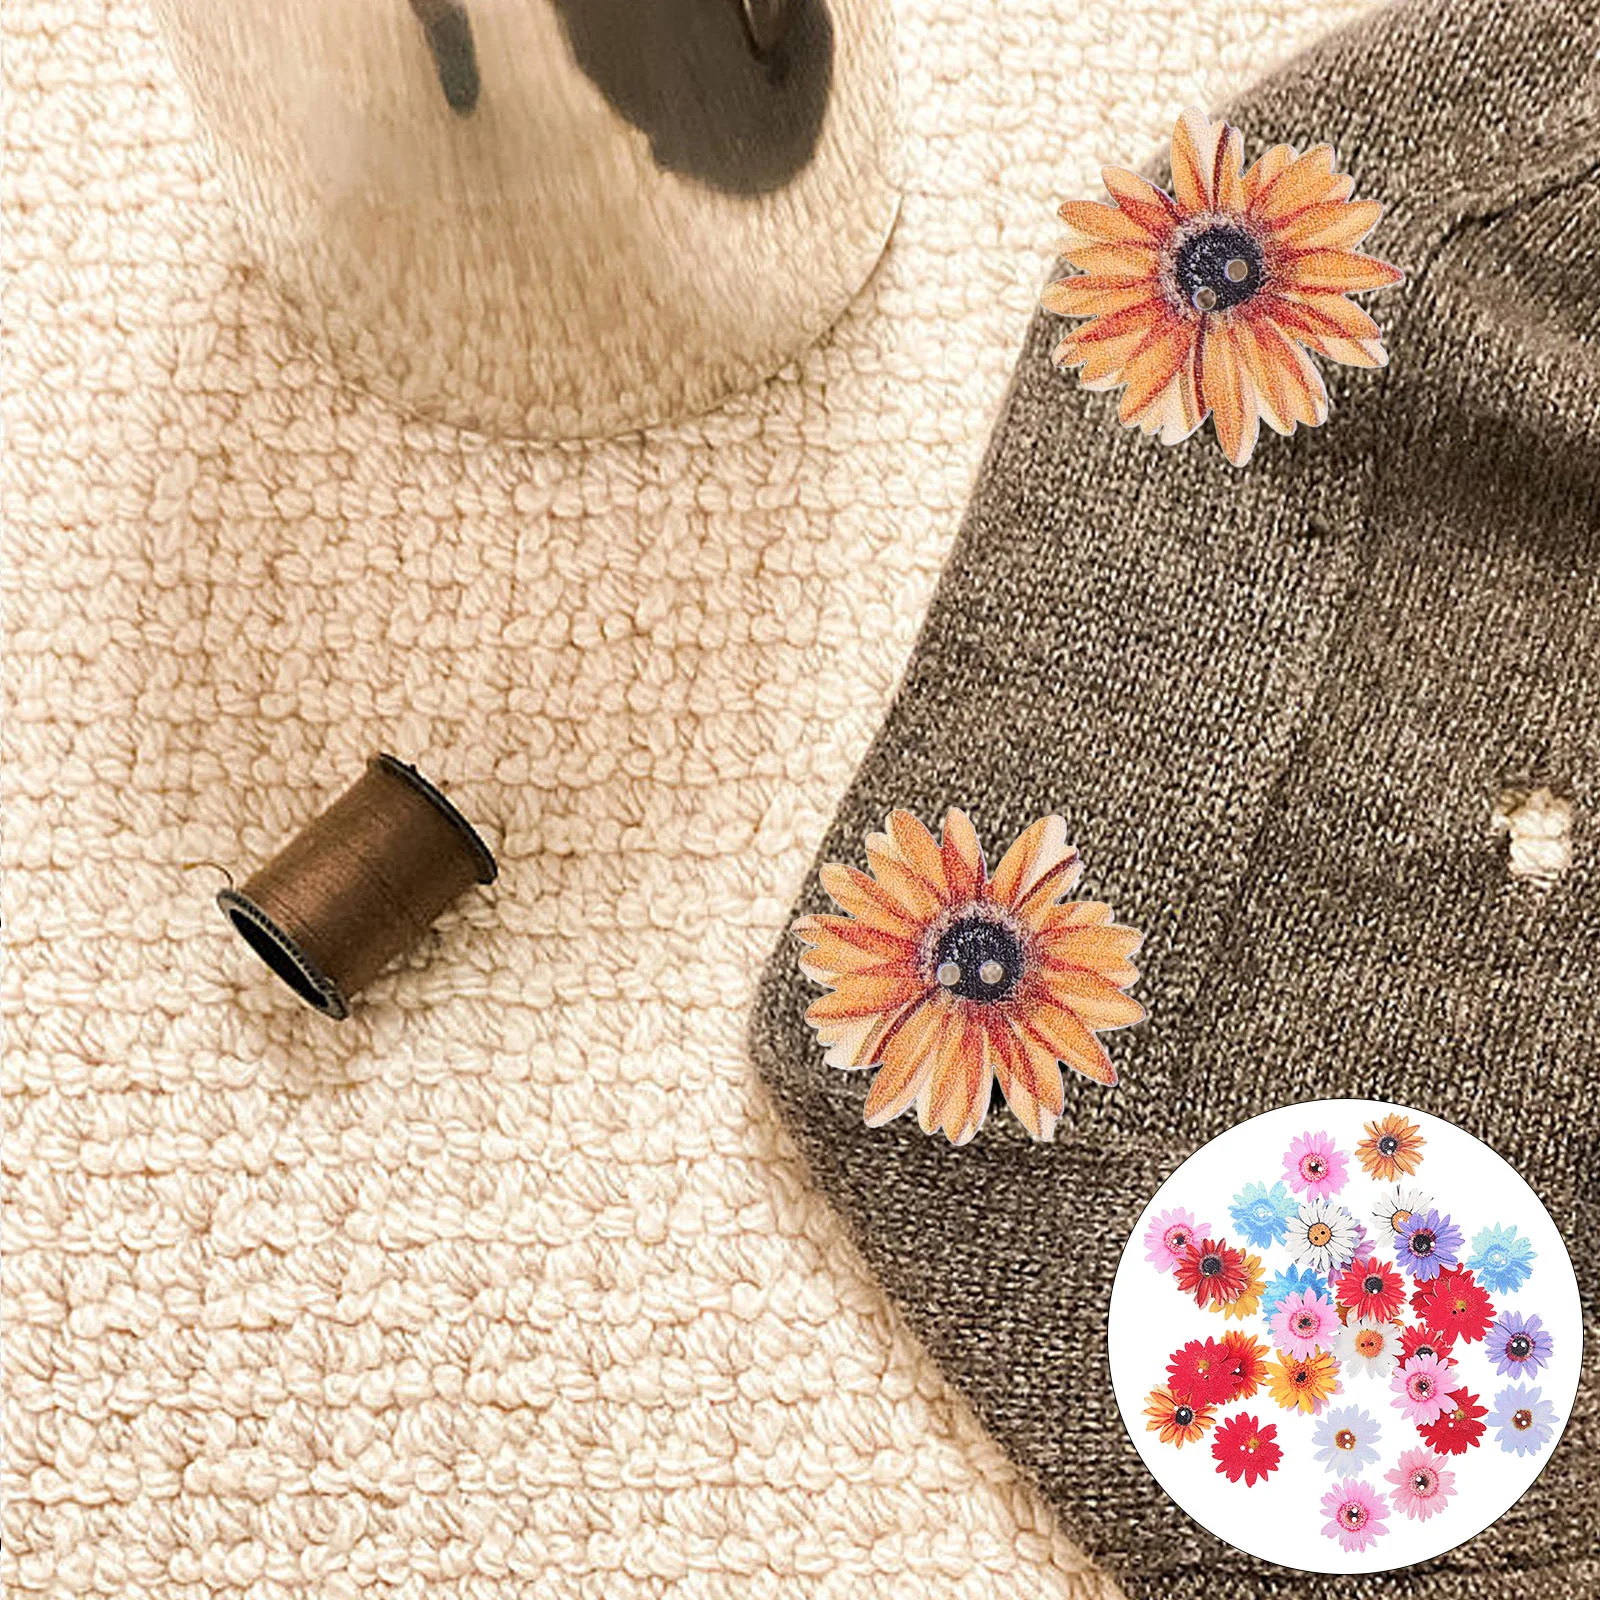 

50 Pcs Sunflower Clothes Buttons Clothing Sewing Painted Decorative Wooden Crafts DIY Modeling Replacement